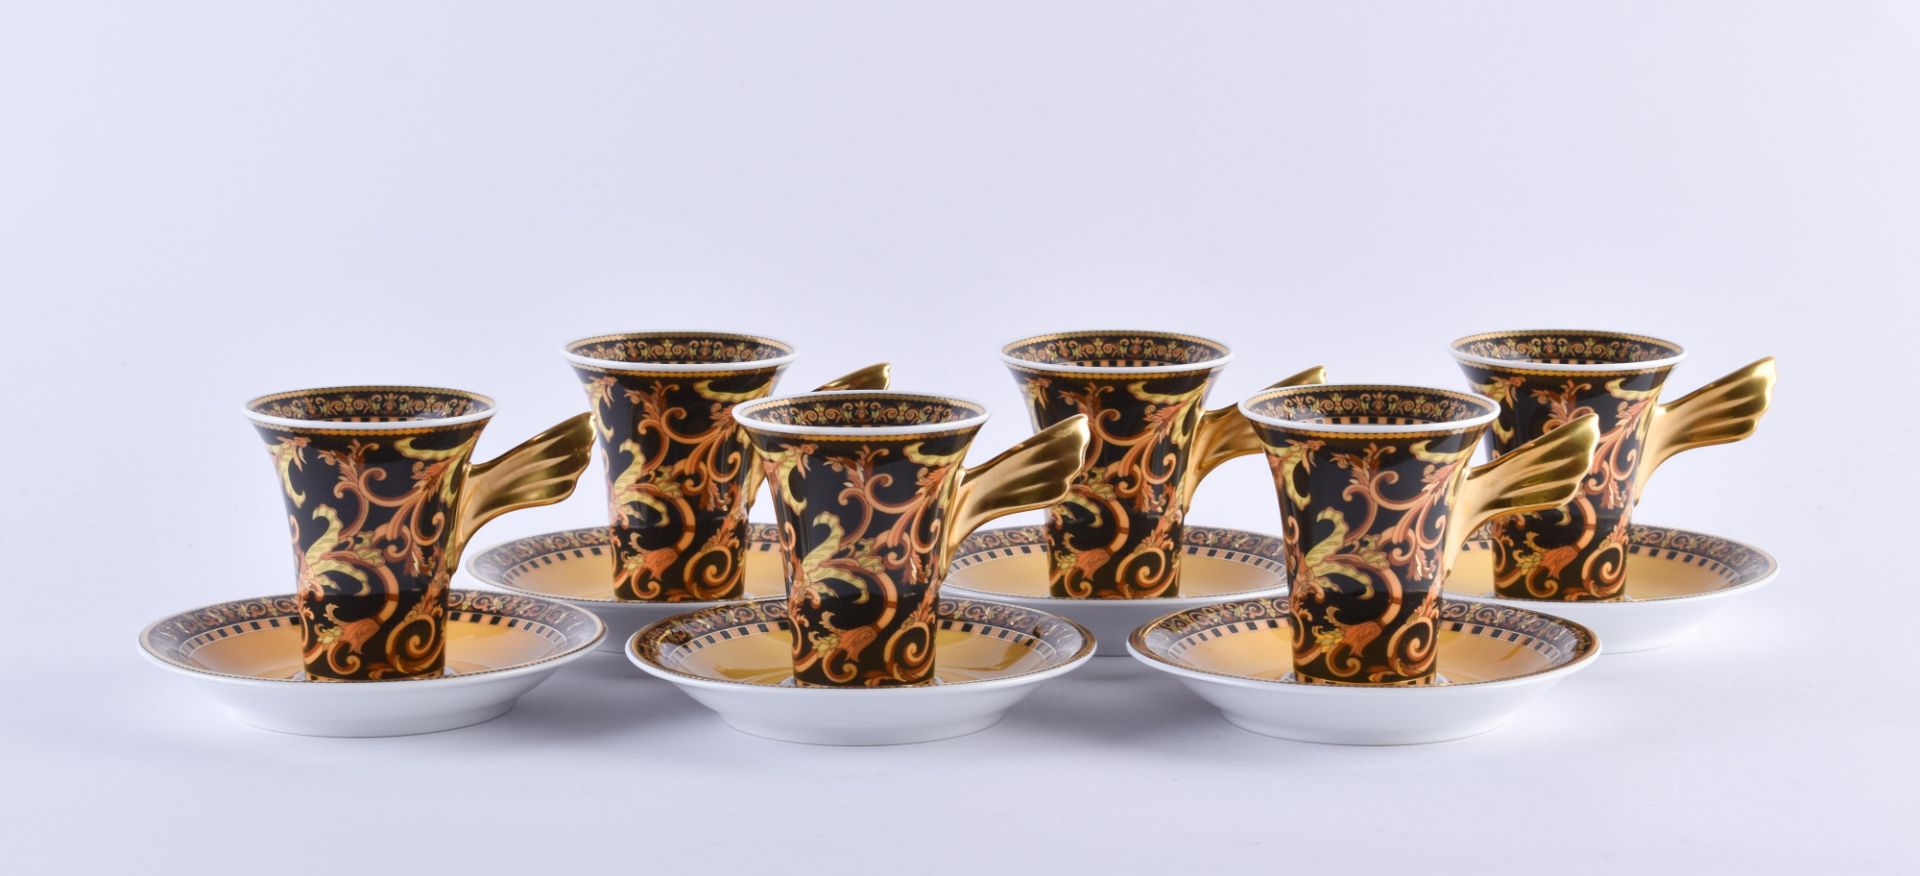 6 mocca cups/espresso cups & 6 saucers Rosenthal Versace Barocco  - Image 2 of 2